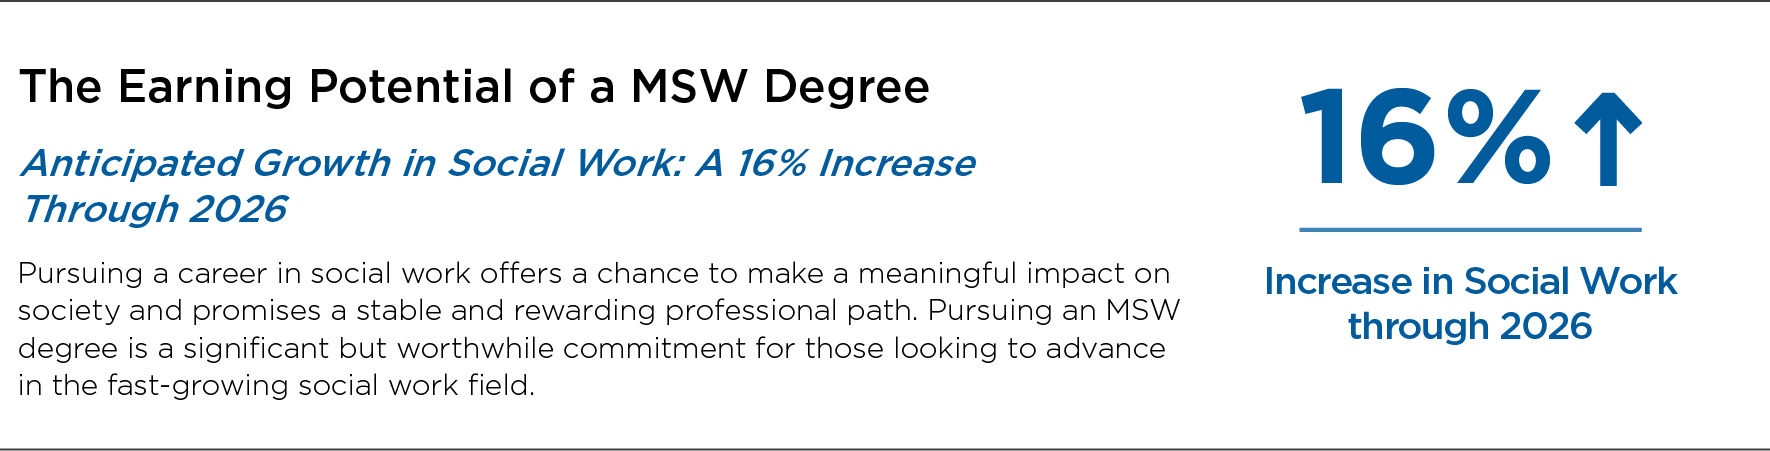 Earning Potential of MSW Degree